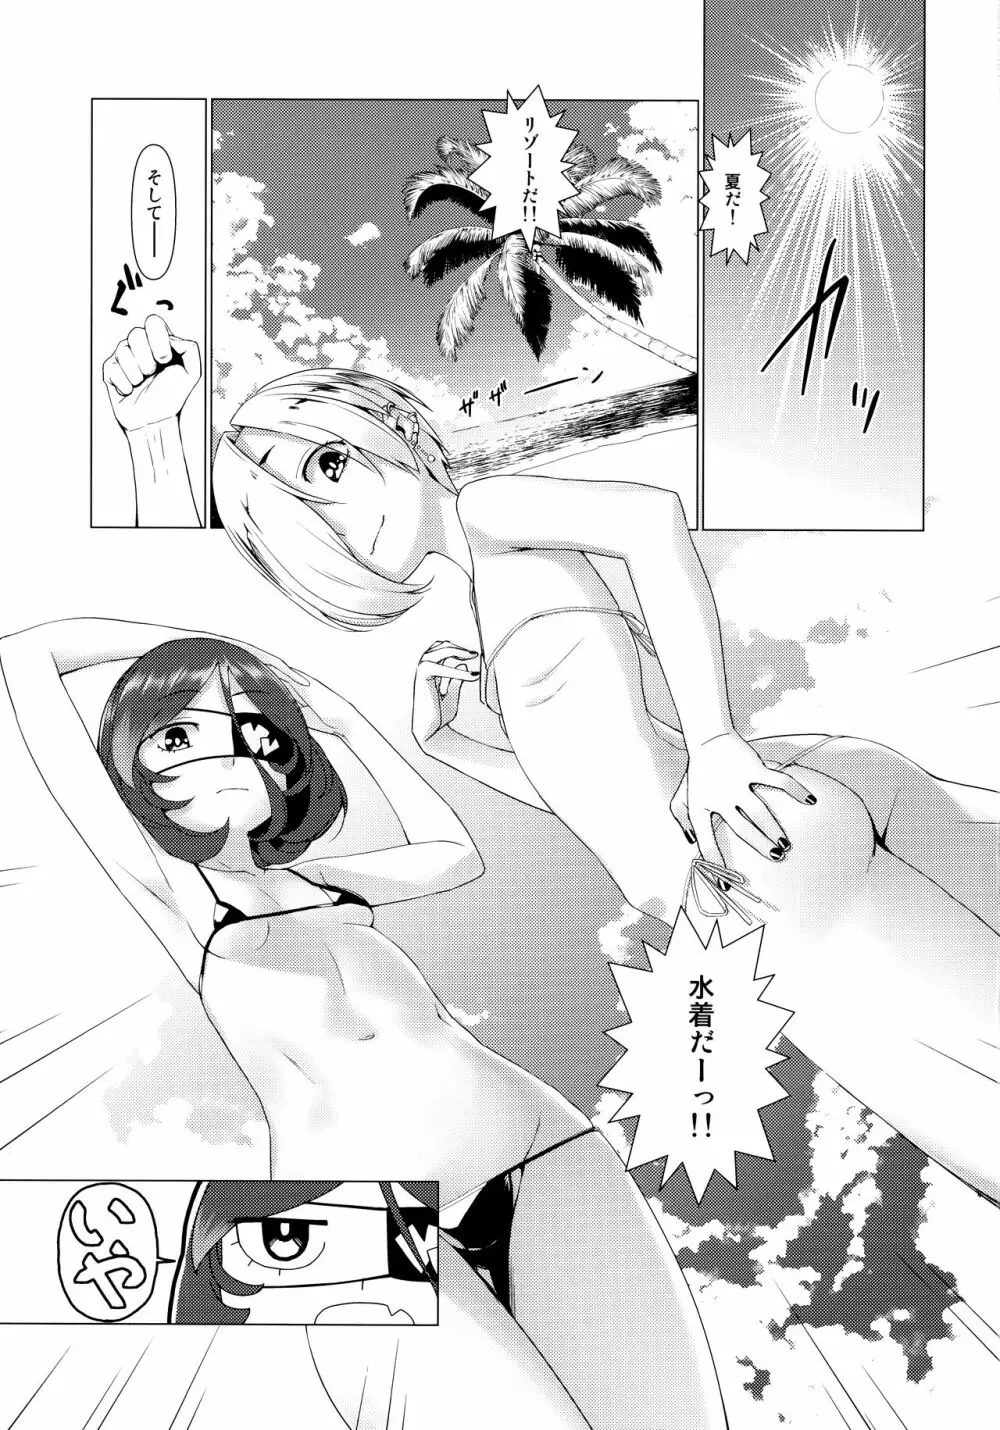 Summer Vacation! Director's cut - page3